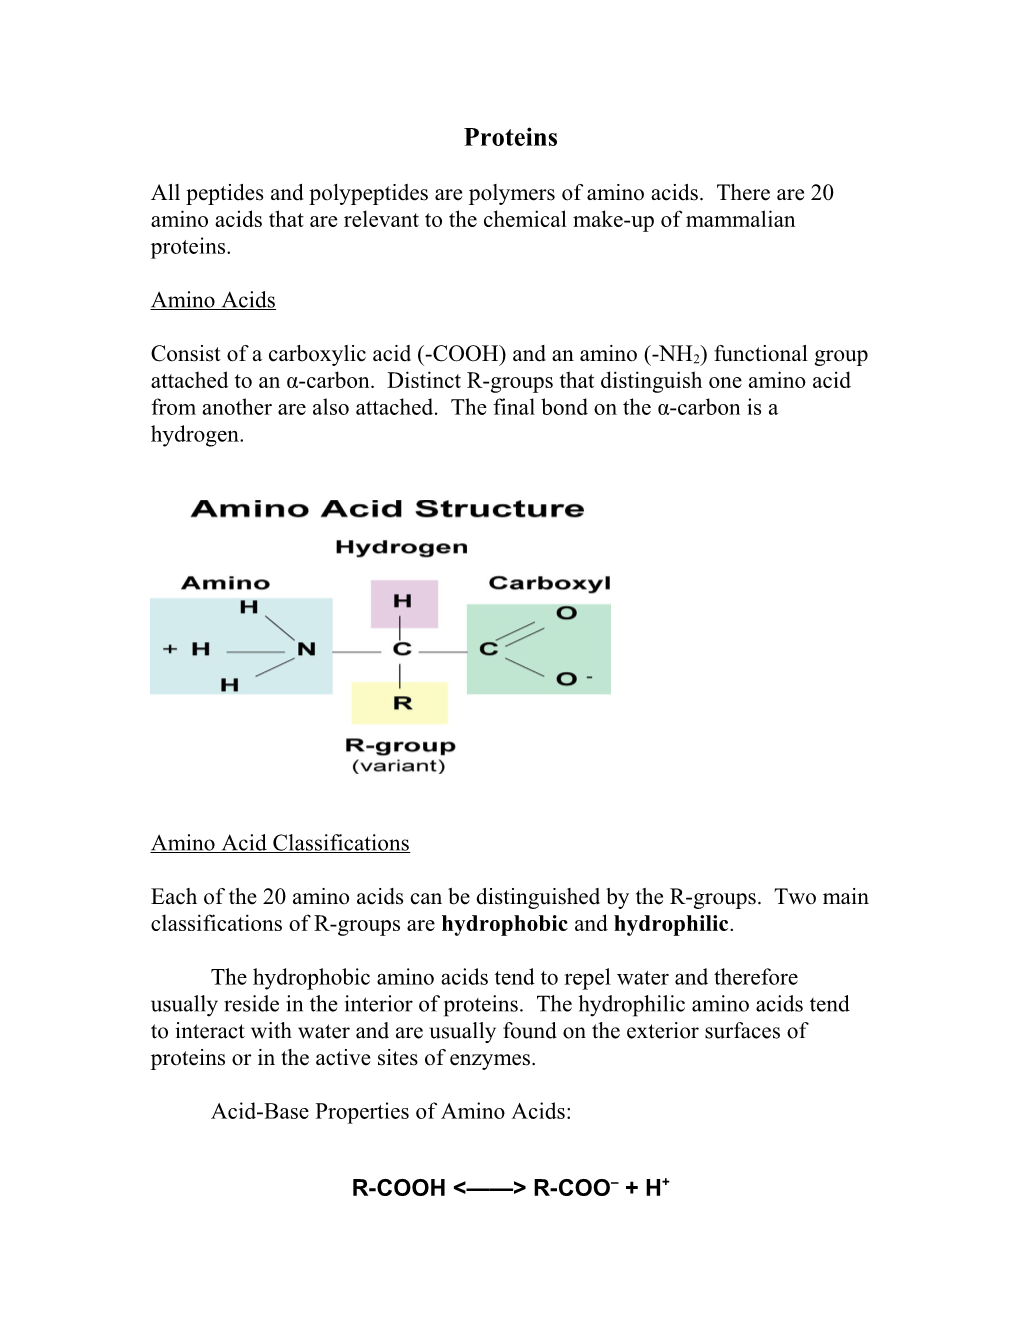 All Peptides and Polypeptides Are Polymers of Amino Acids. There Are 20 Amino Acids That